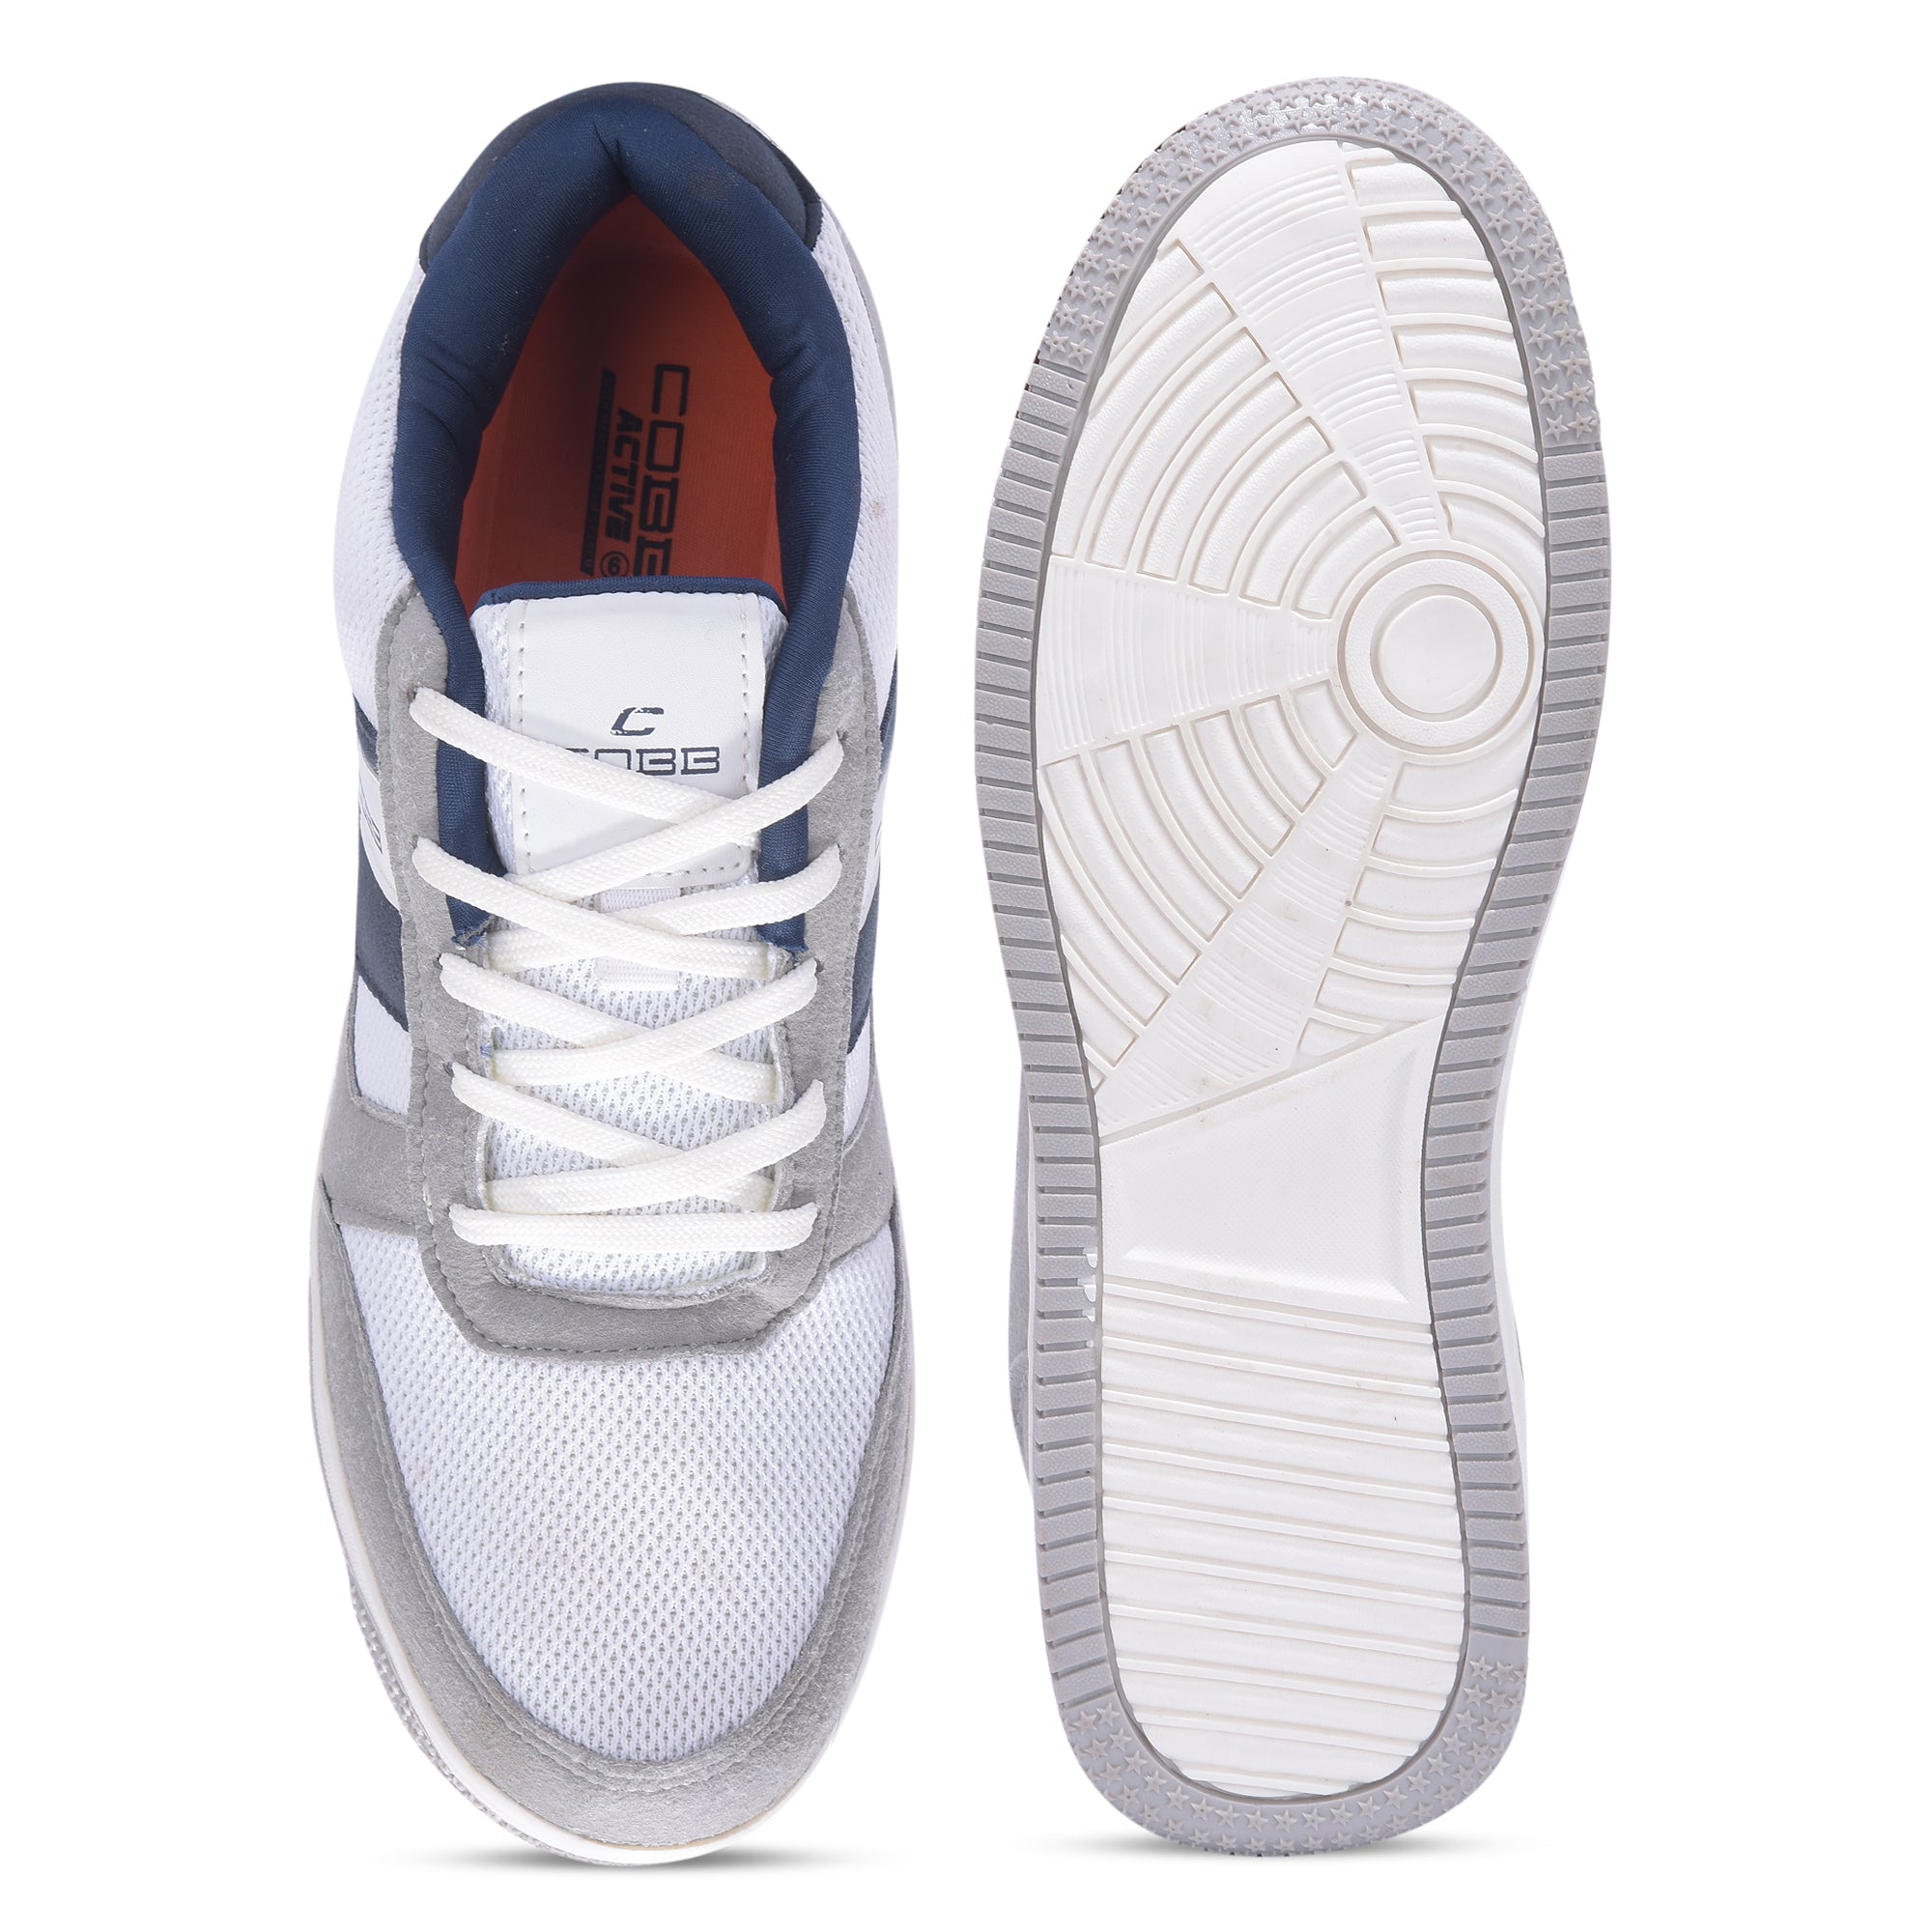 COBB WHITE GREY CASUAL SHOES